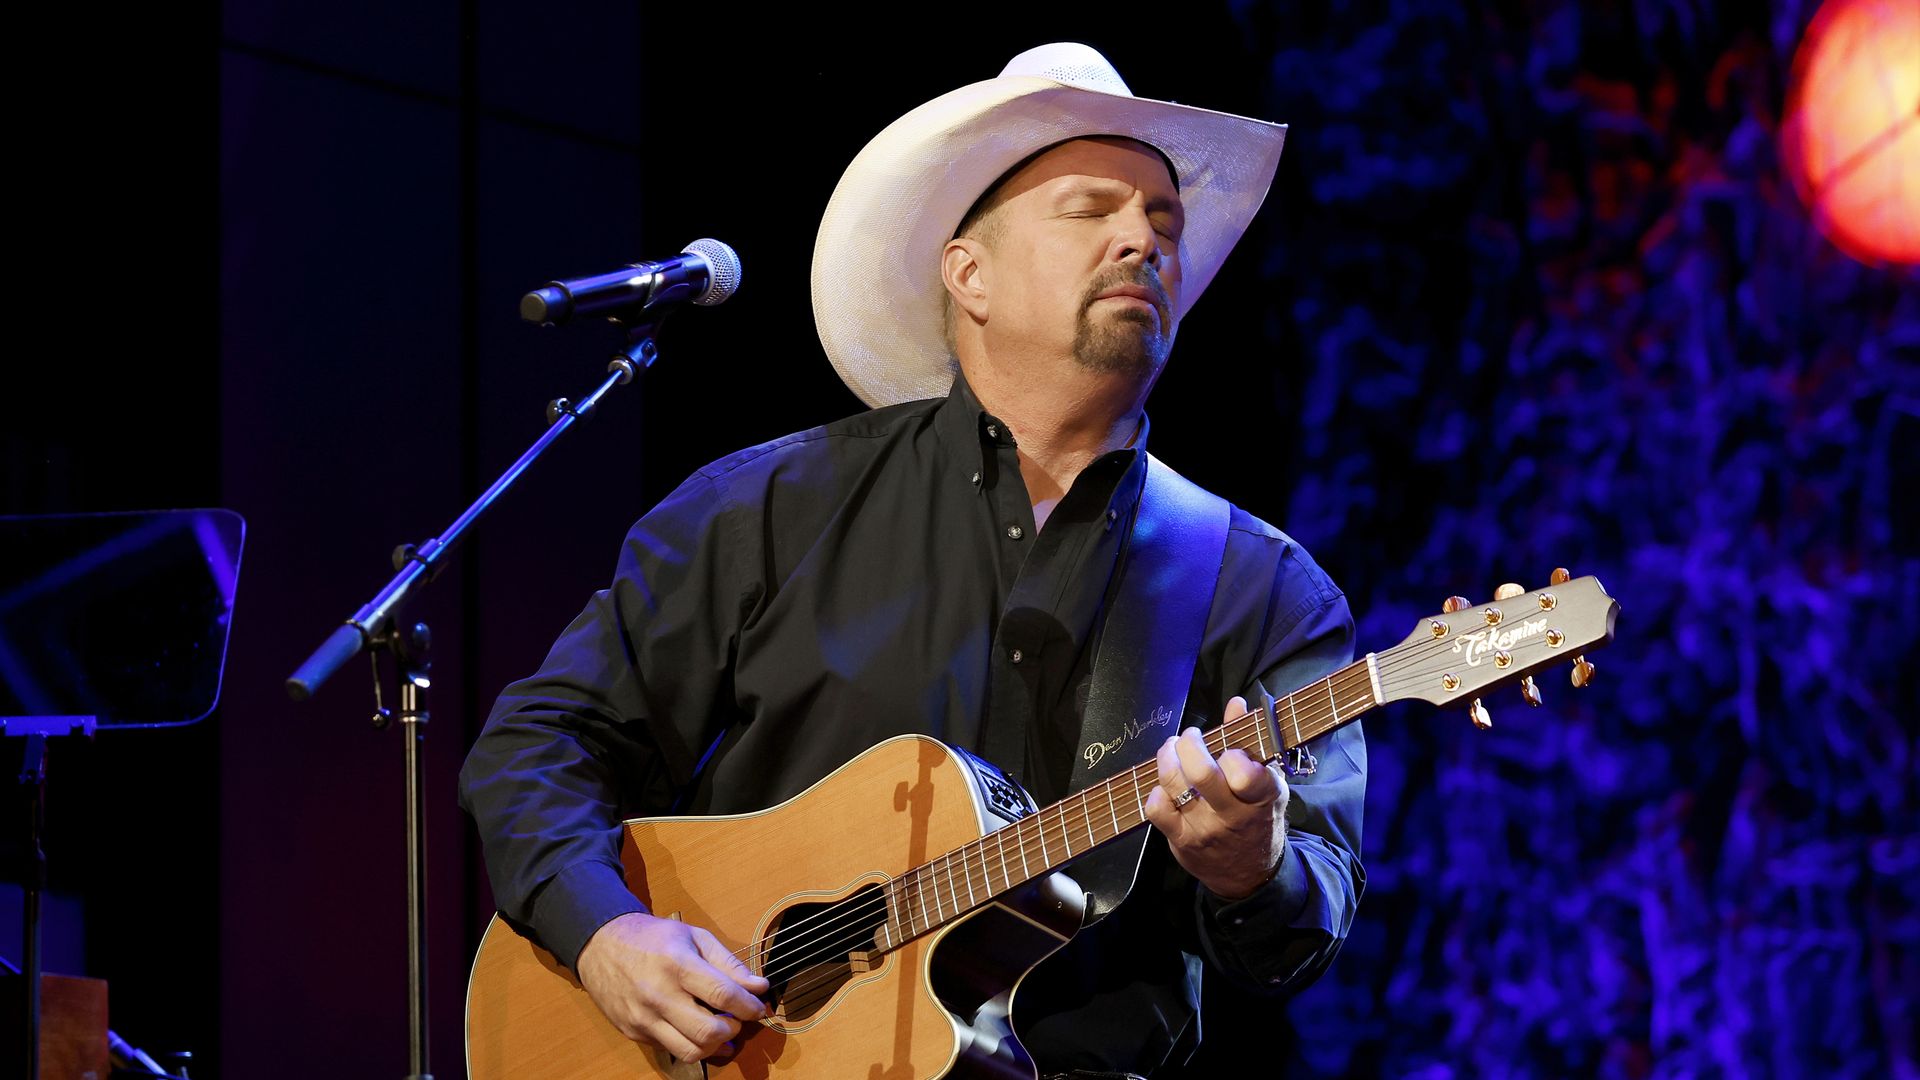 Photo shows Garth Brooks performing on stage